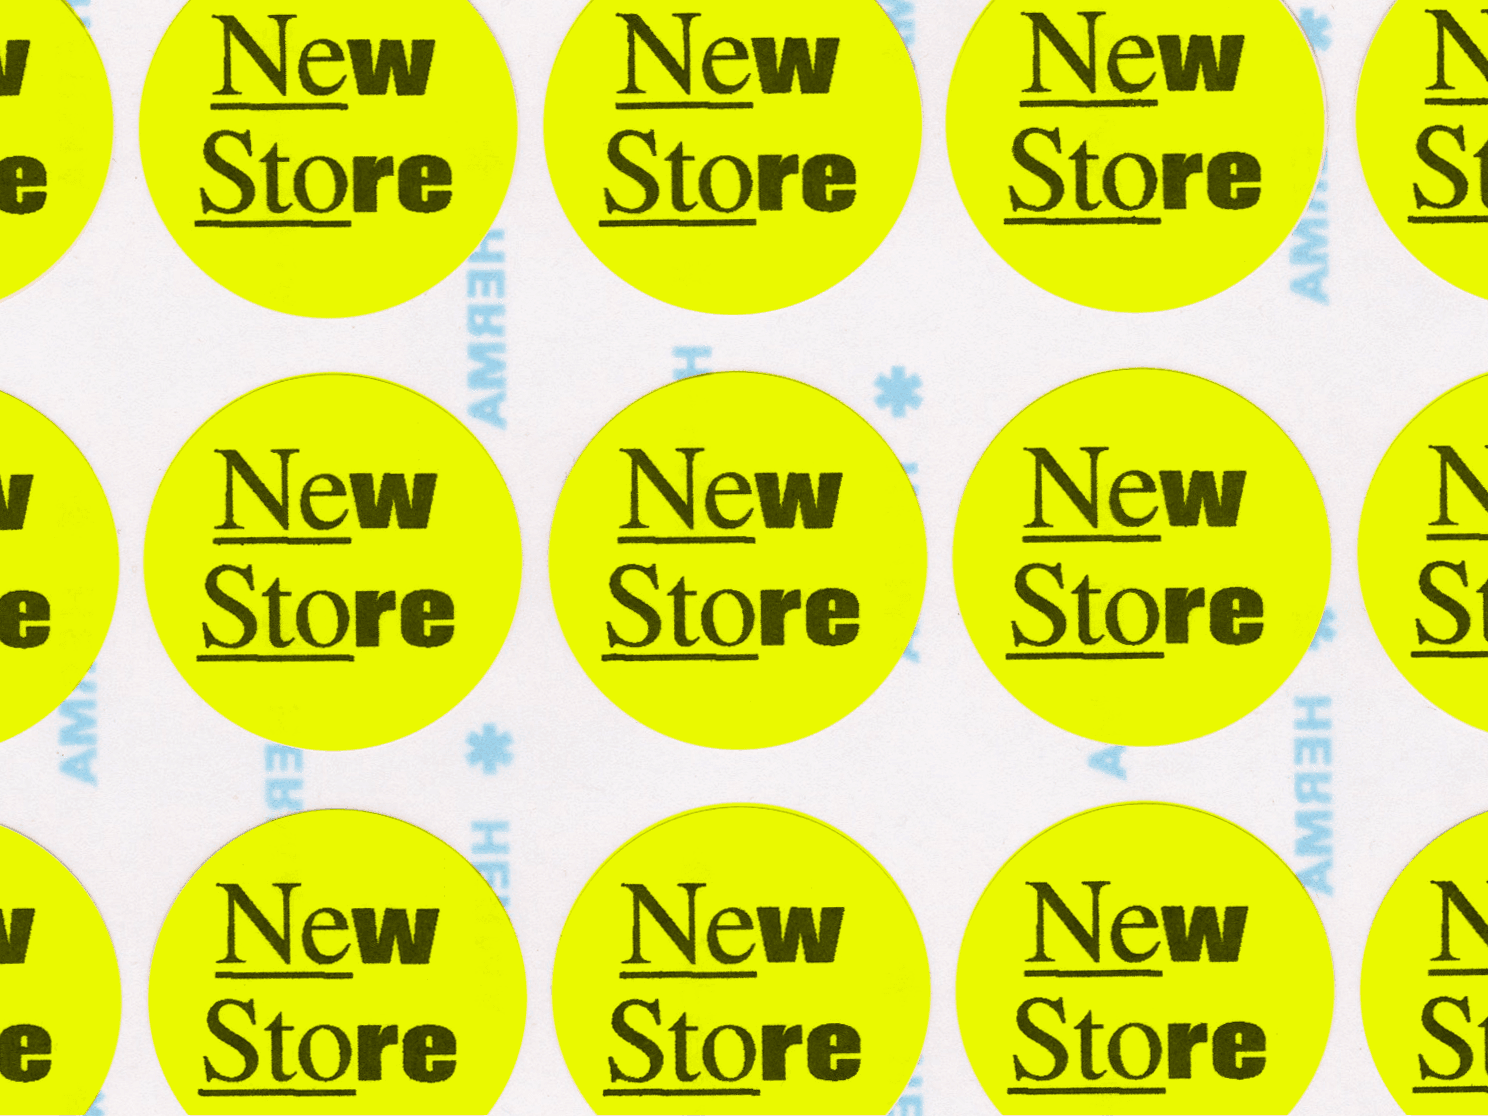 Graphic image featuring a grid of yellow round stickers, each sticker with the text 'New Store'